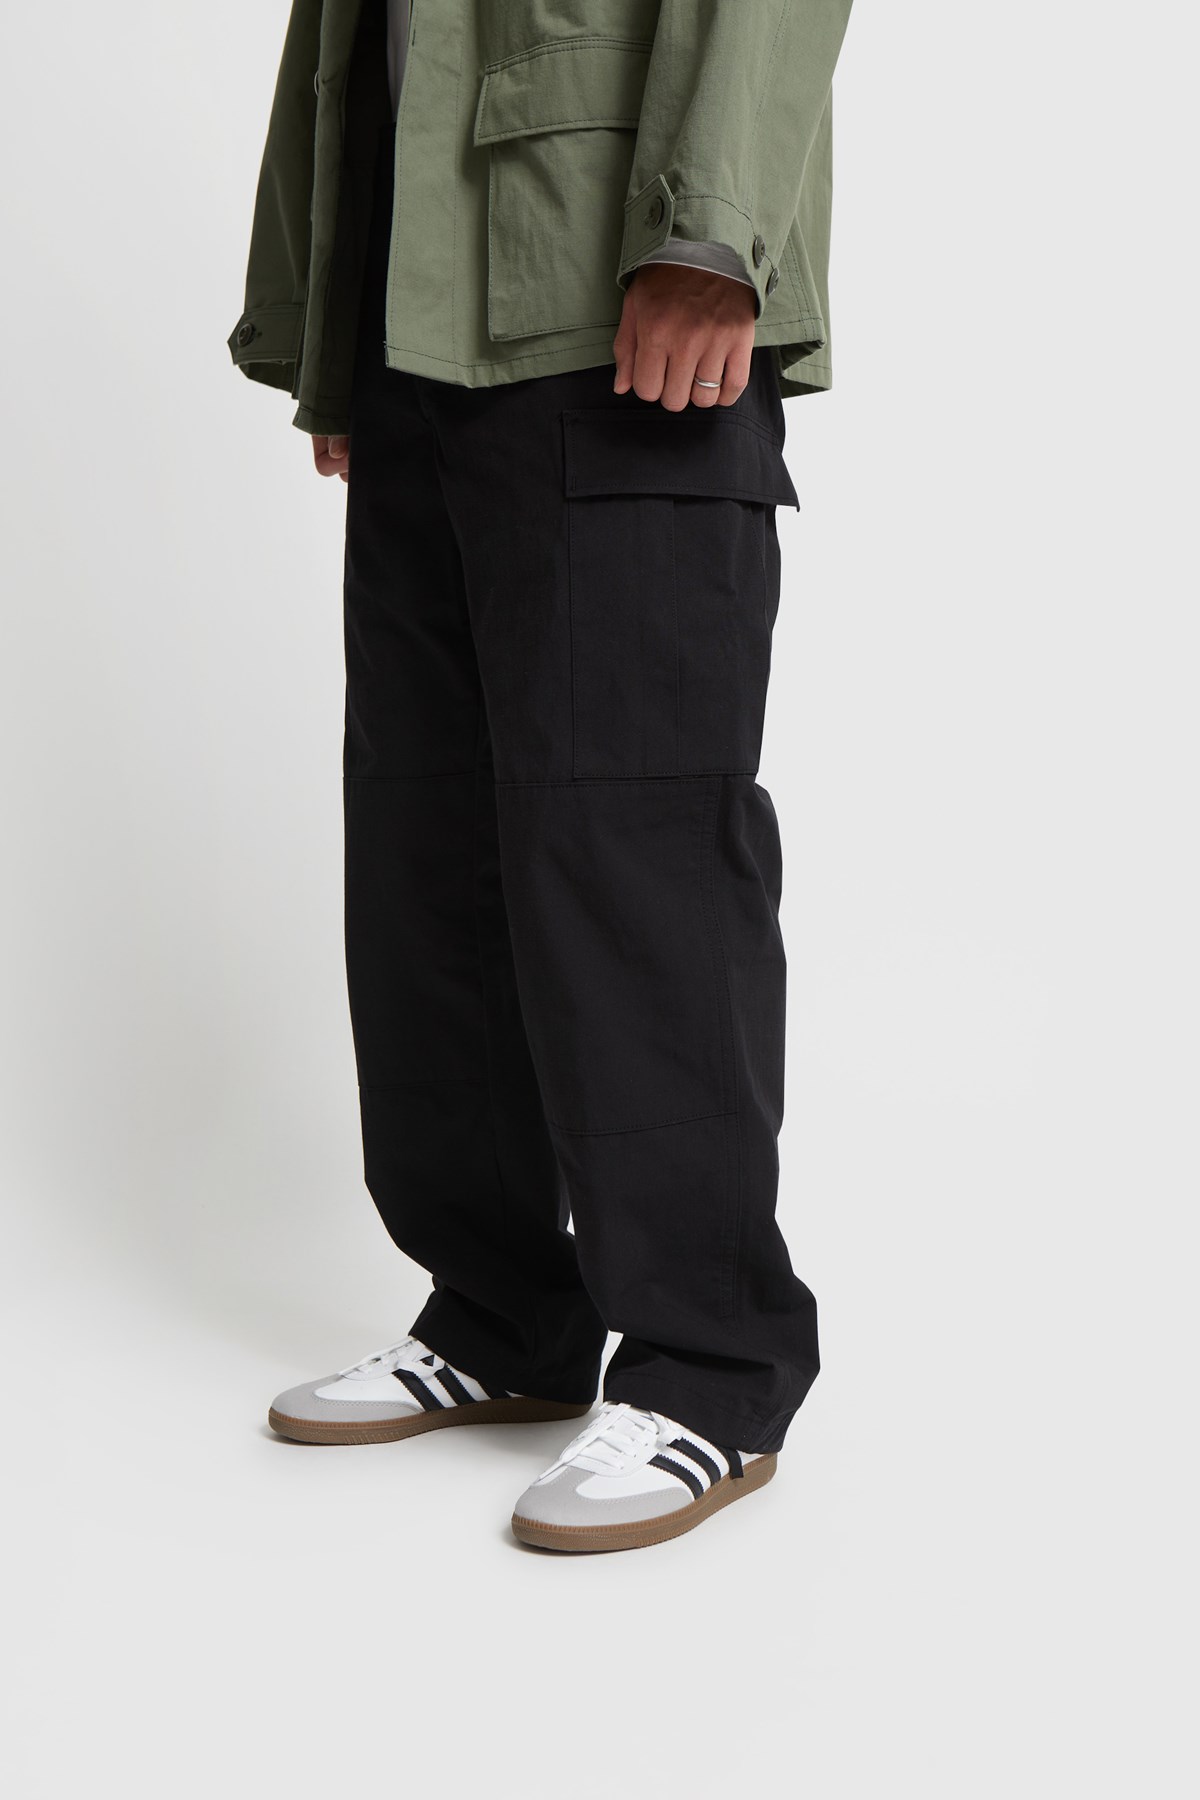 WTAPS WMILL-Trousers 01 / NYCO. Black | WoodWood.com